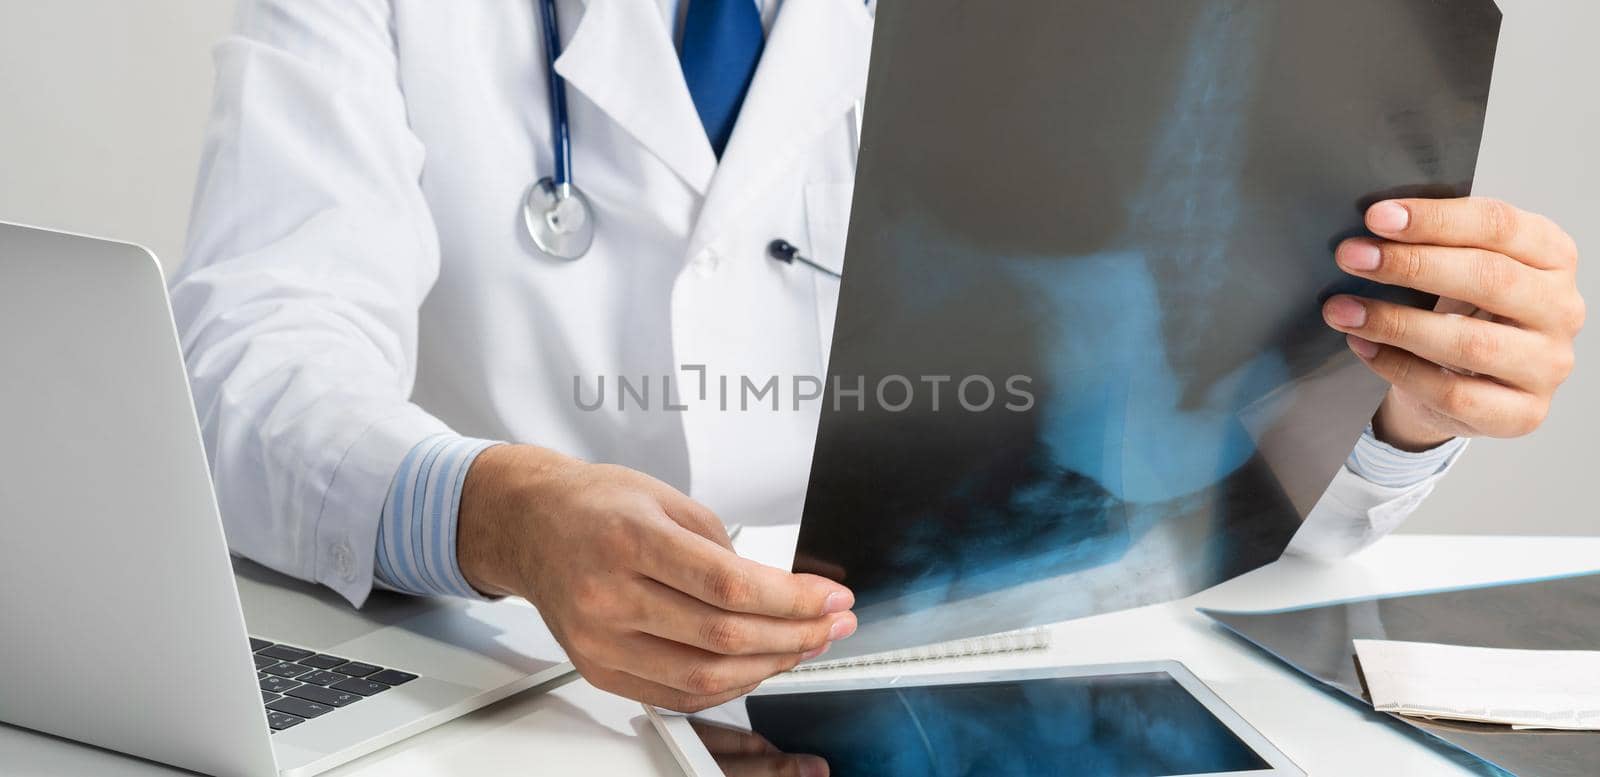 Close up of male doctor hands holding x-ray scan. Physician with stethoscope examining x-ray image. Professional medical diagnosis and treatment in hospital. Medical testing and radiography expertise.